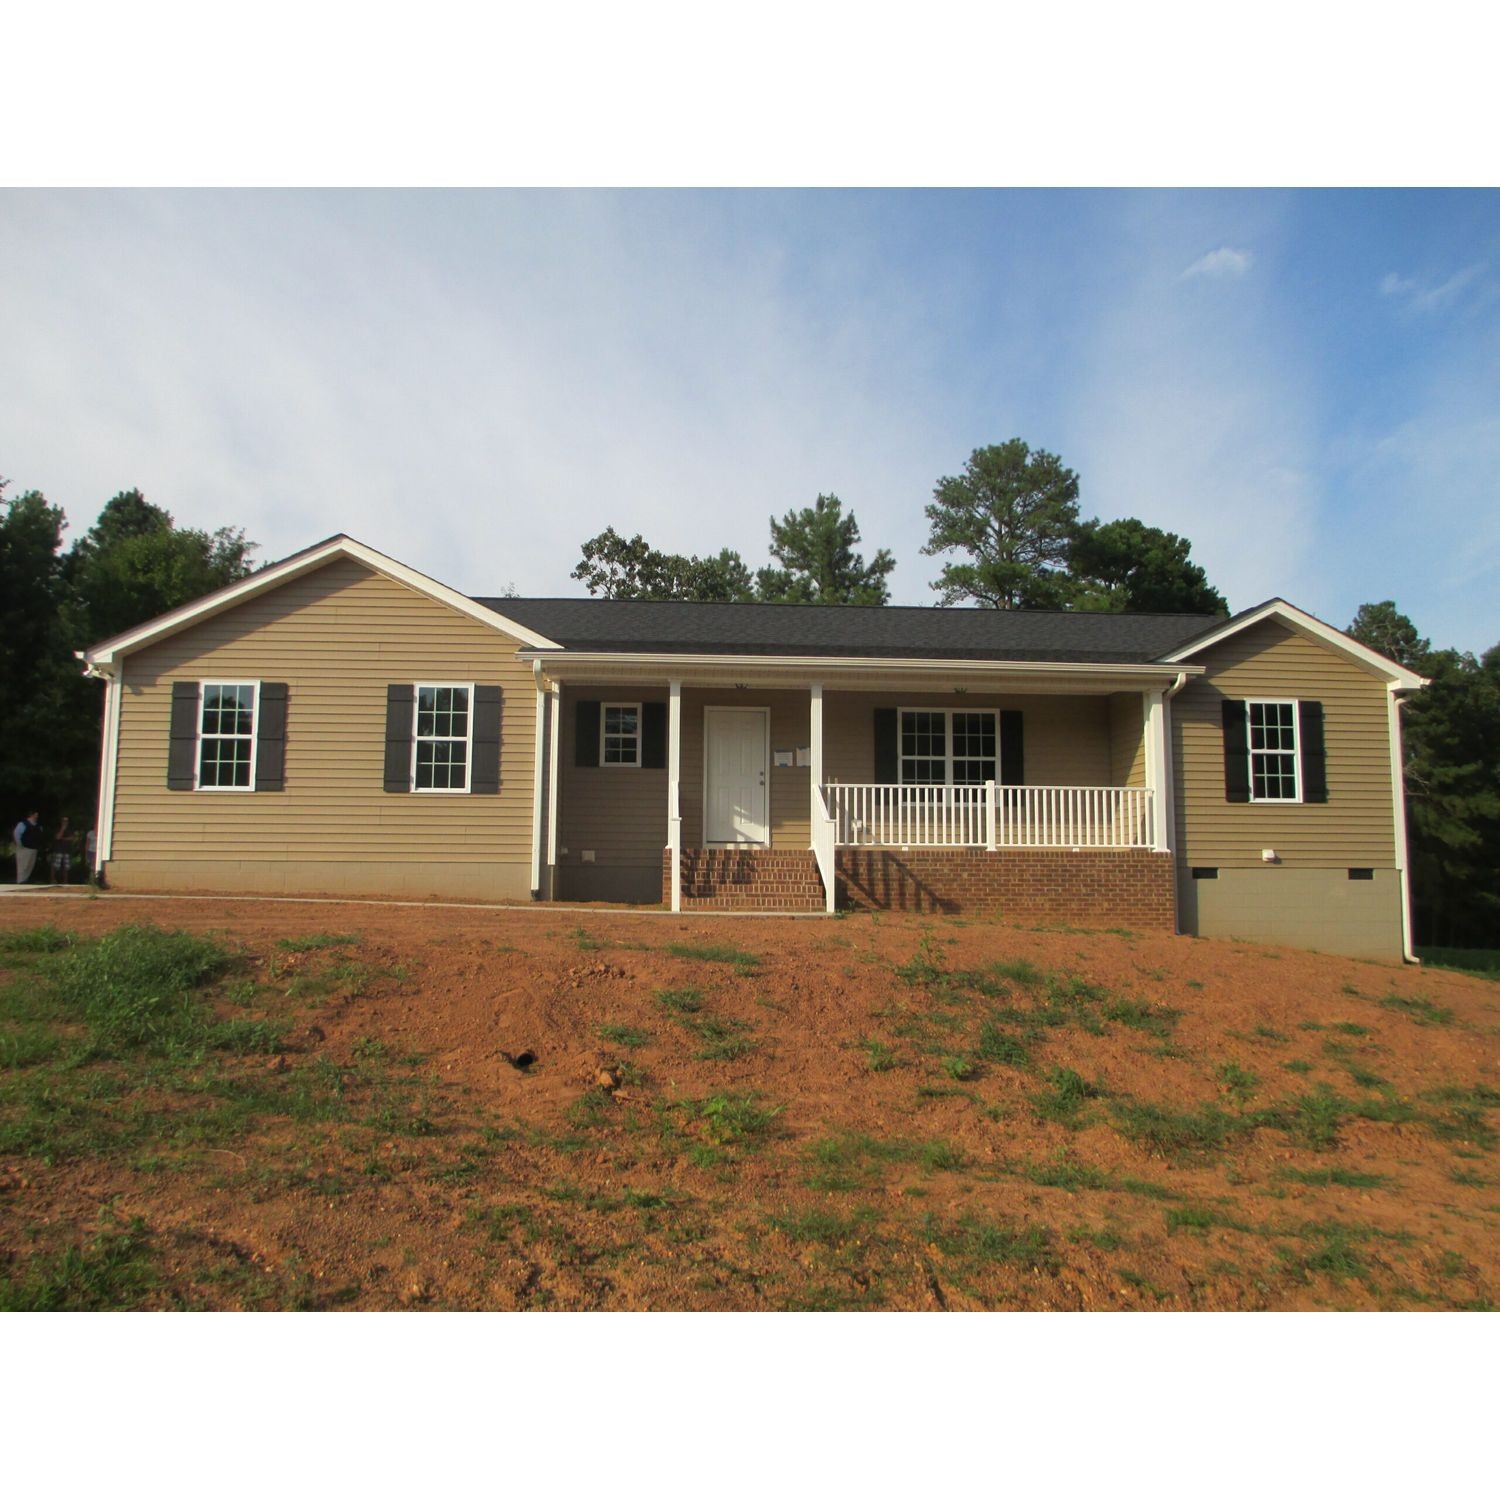 9. Valuebuild Homes - Greenville Nc - Build On Your L